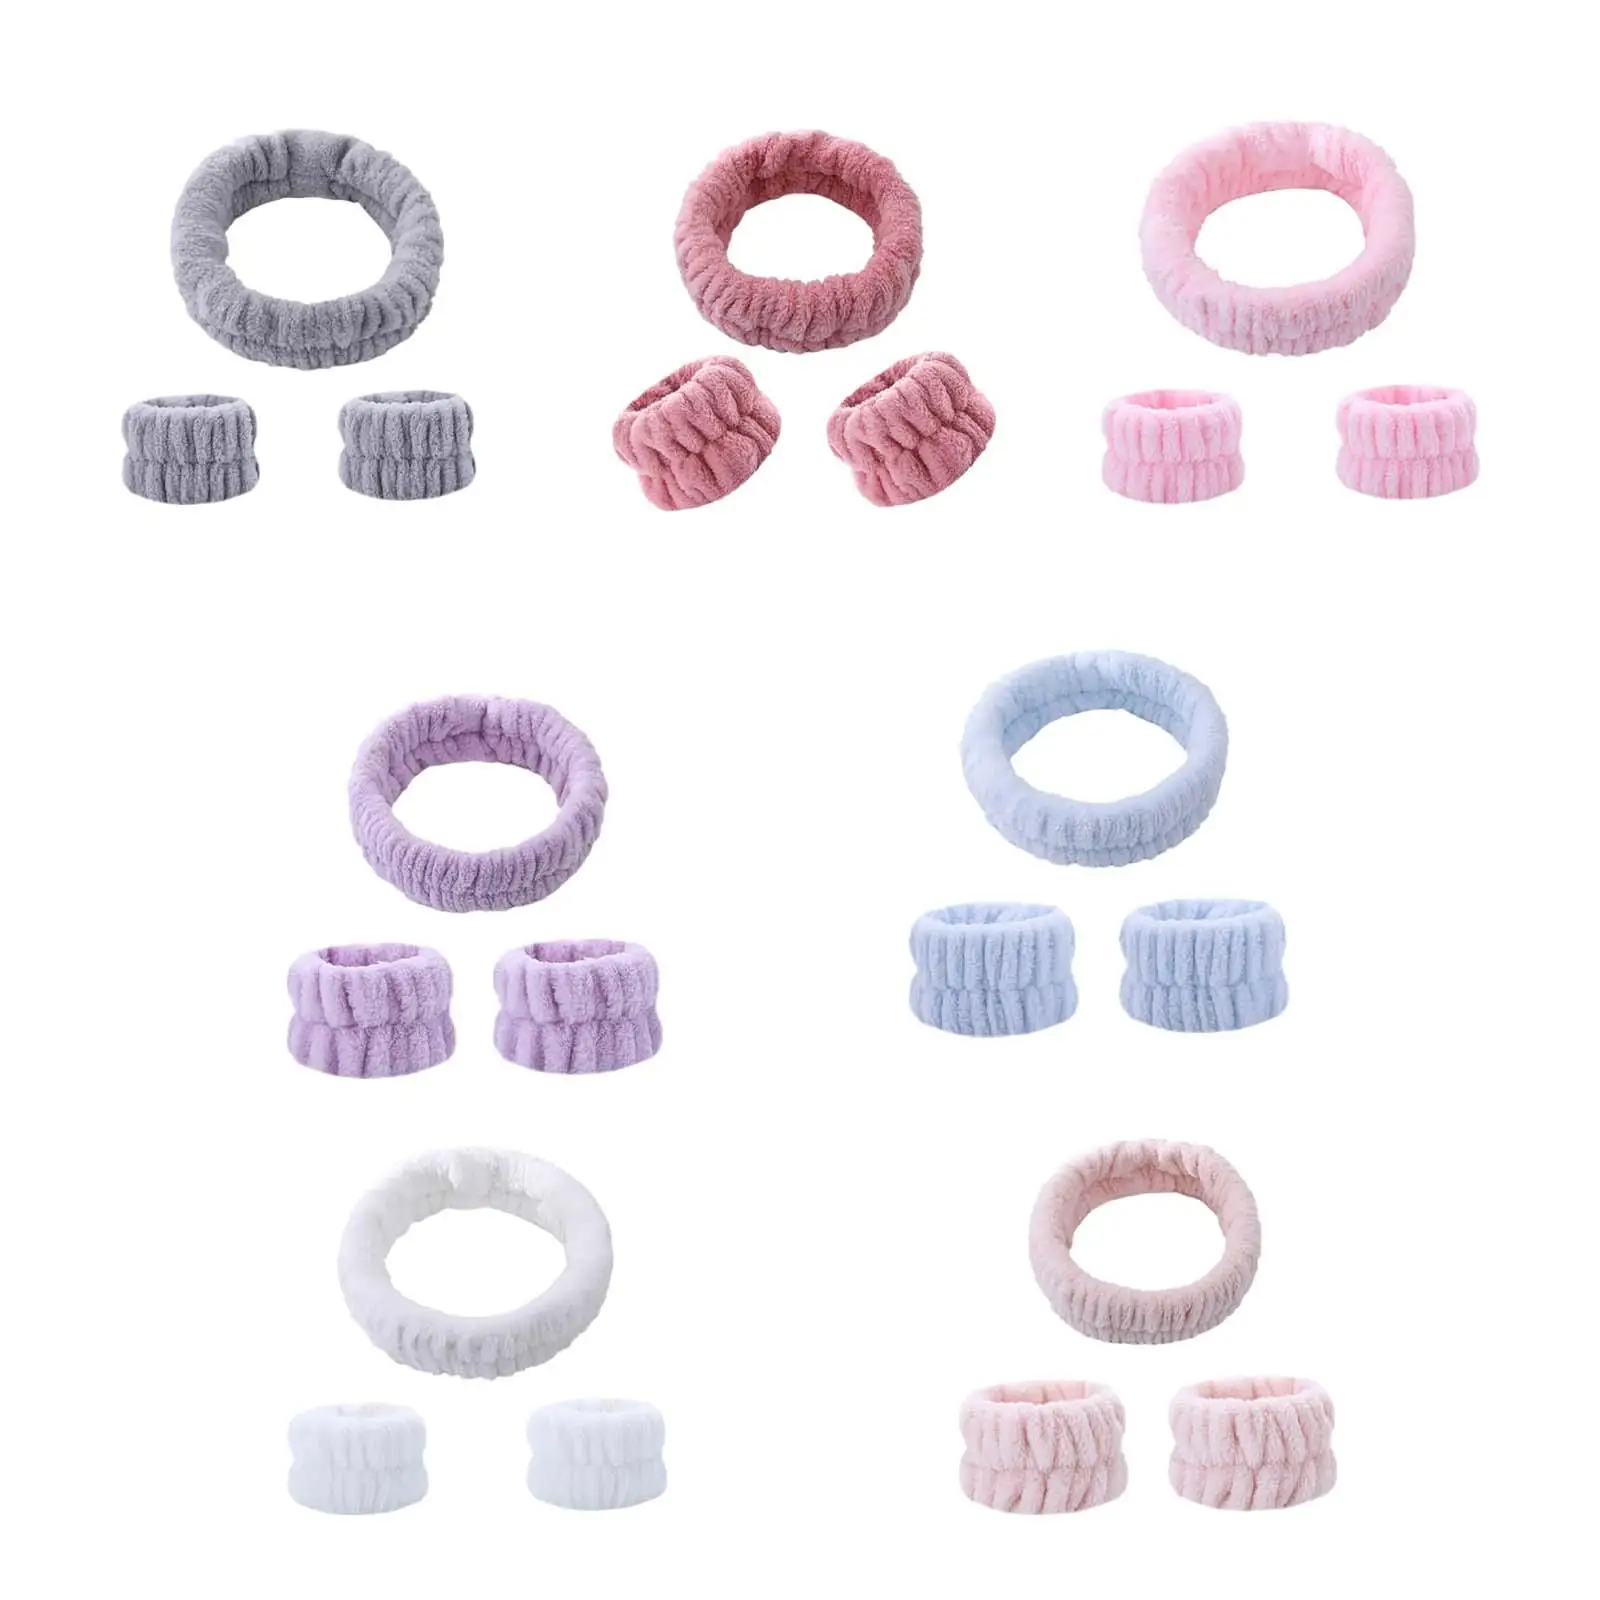 Face Wash Headband Wristband Set for Women Solid Color Soft Facial Wrist Cuffs Makeup Headband for Shower Washing Face Sports